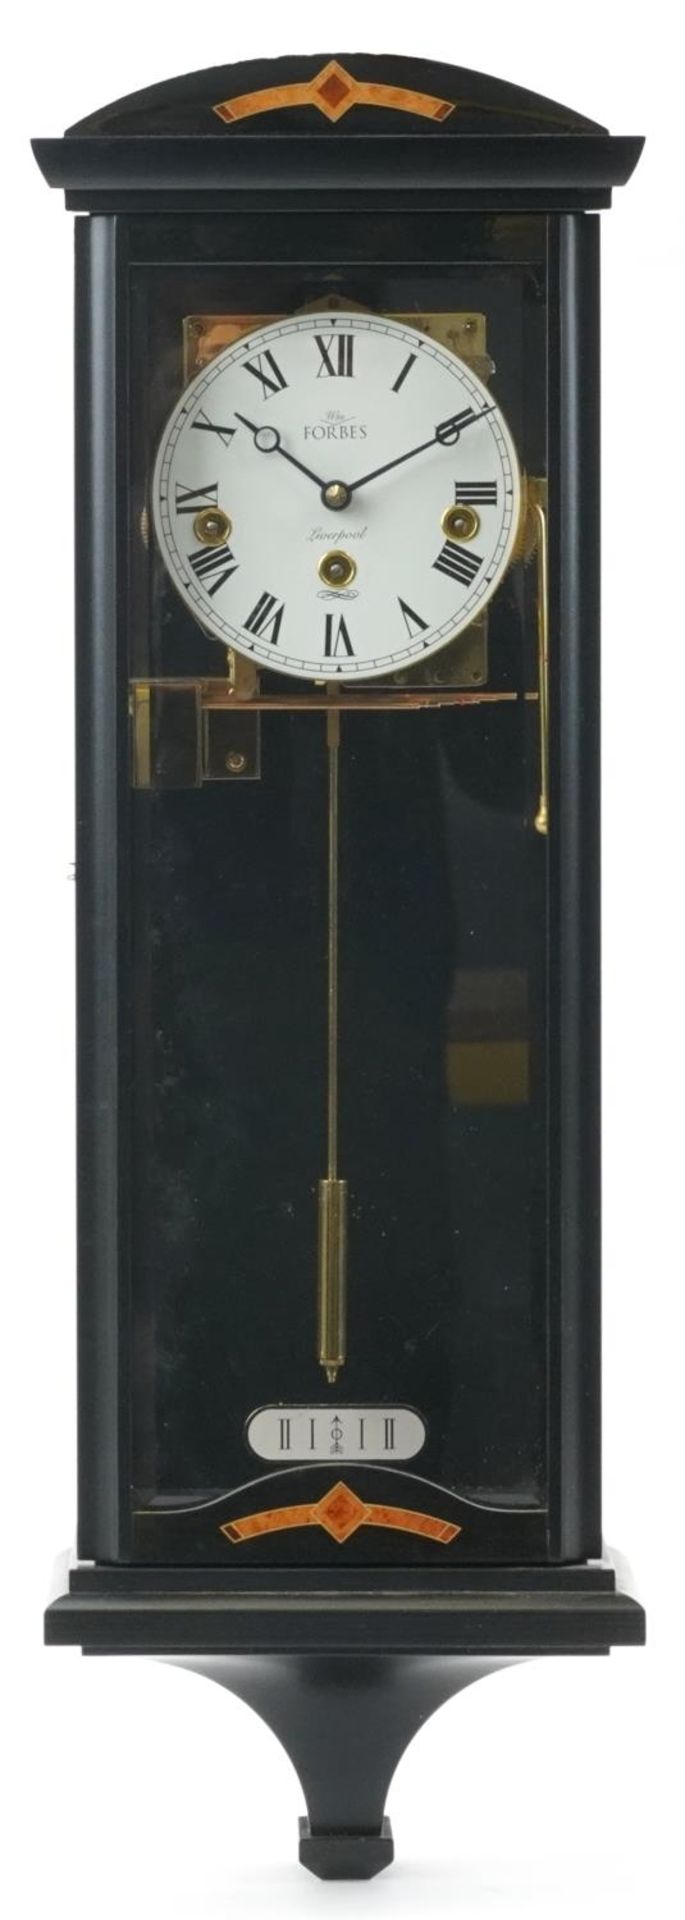 The William Forbes Windermere Viennese Regulator ebony and burr wood wall clock striking on eight